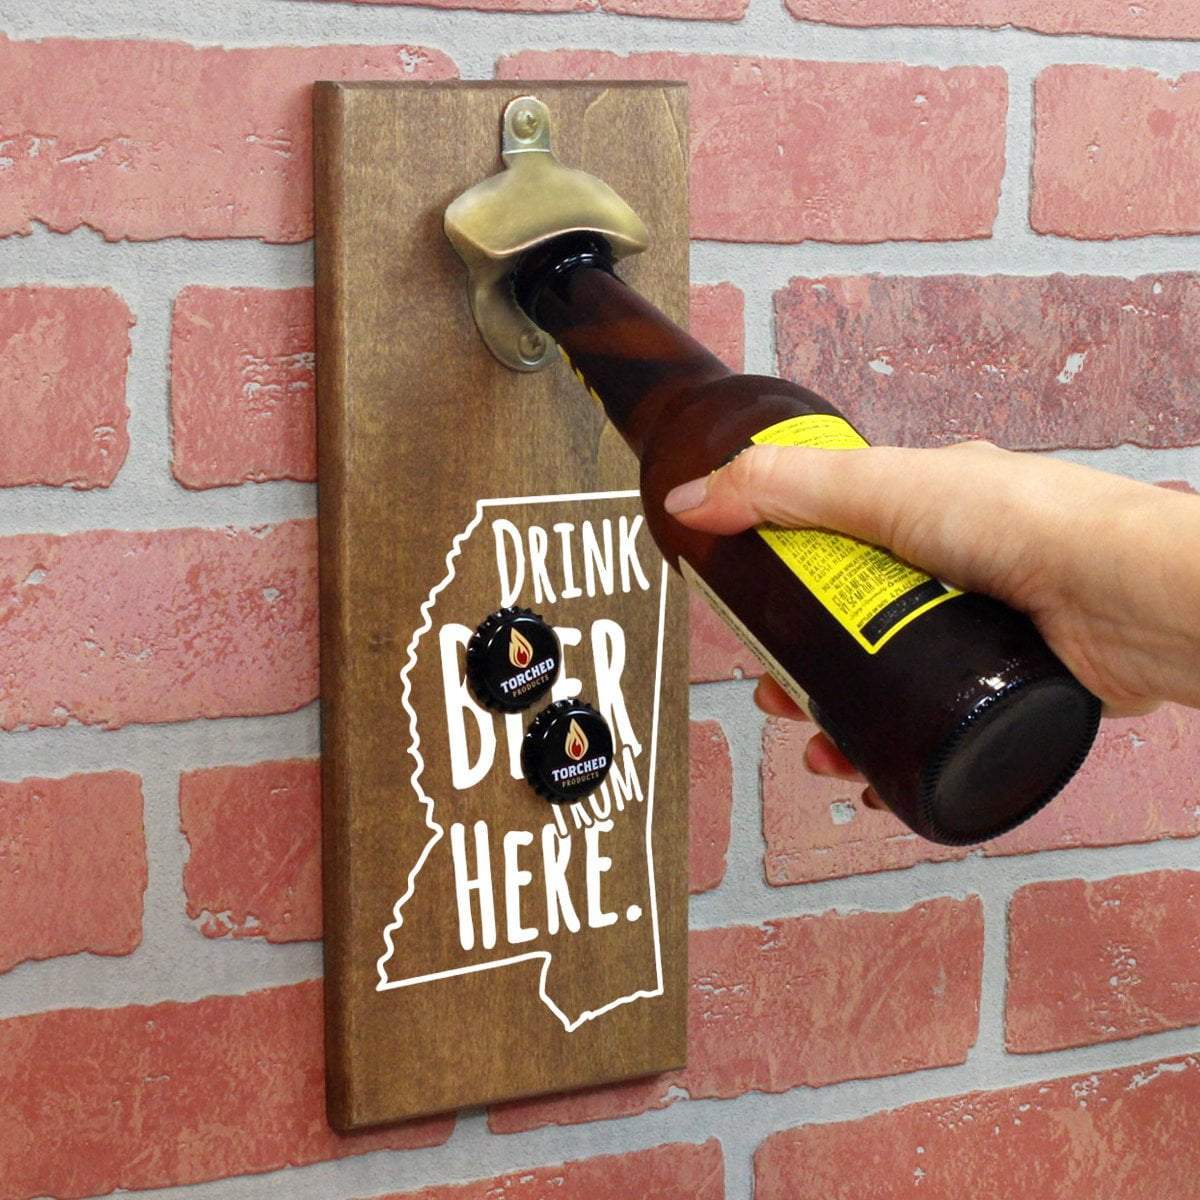 Torched Products Bottle Opener Default Title Mississippi Drink Beer From Here Cap Catching Magnetic Bottle Opener (781490946165)